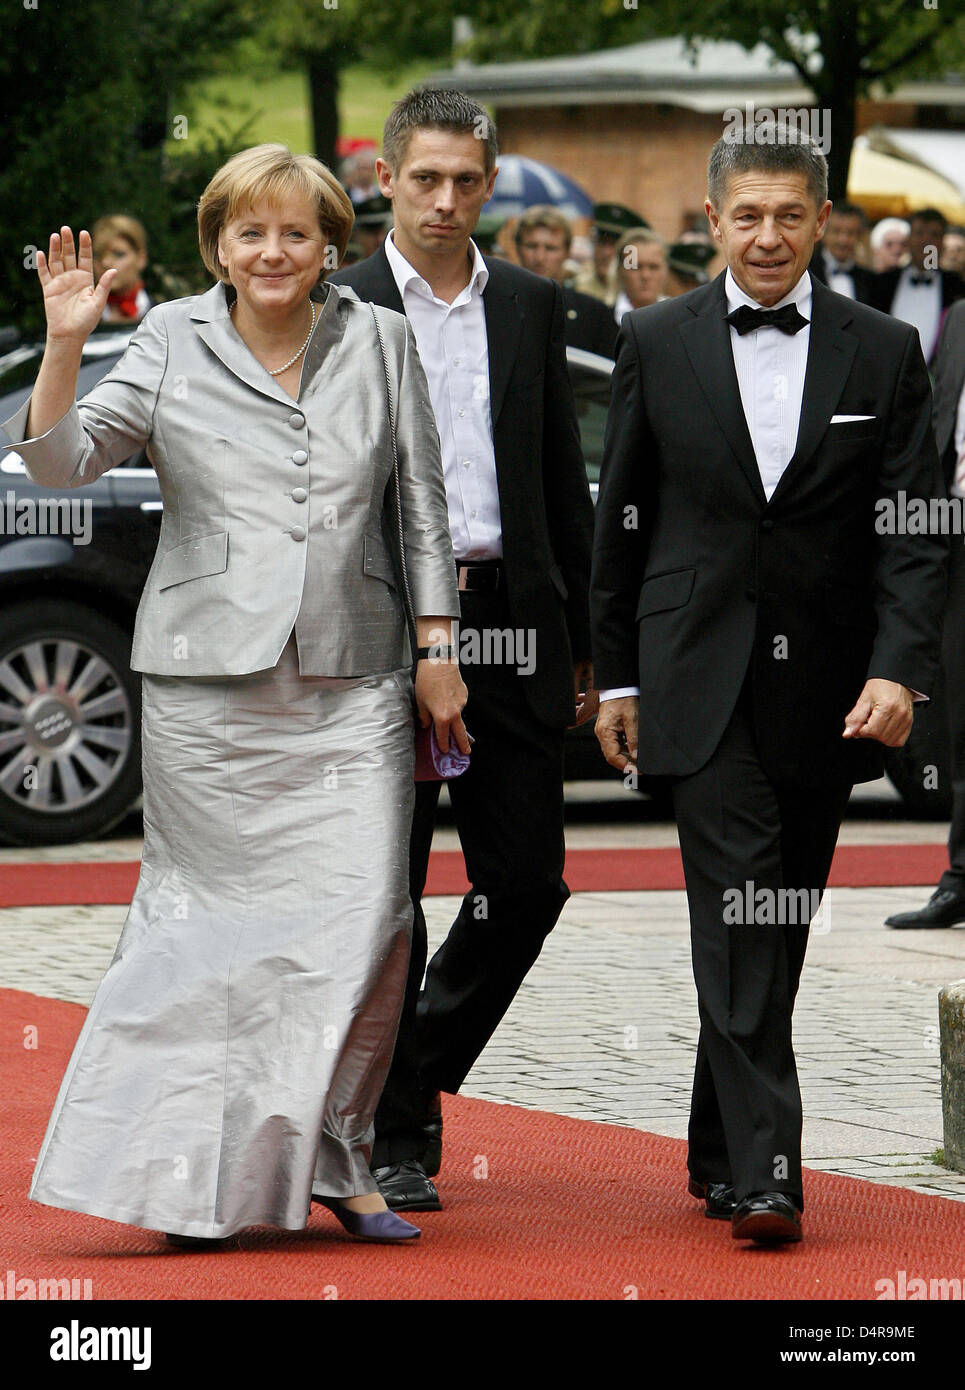 REPETITION WITH ADDITIONAL IDENTIFICATION: German Chancellor Angela Merkel,  her husband Joachim Sauer (R) and his son Daniel Sauer arrive at the  opening of the Bayreuth Festival 2009 in Bayreuth, Germany, 25 July